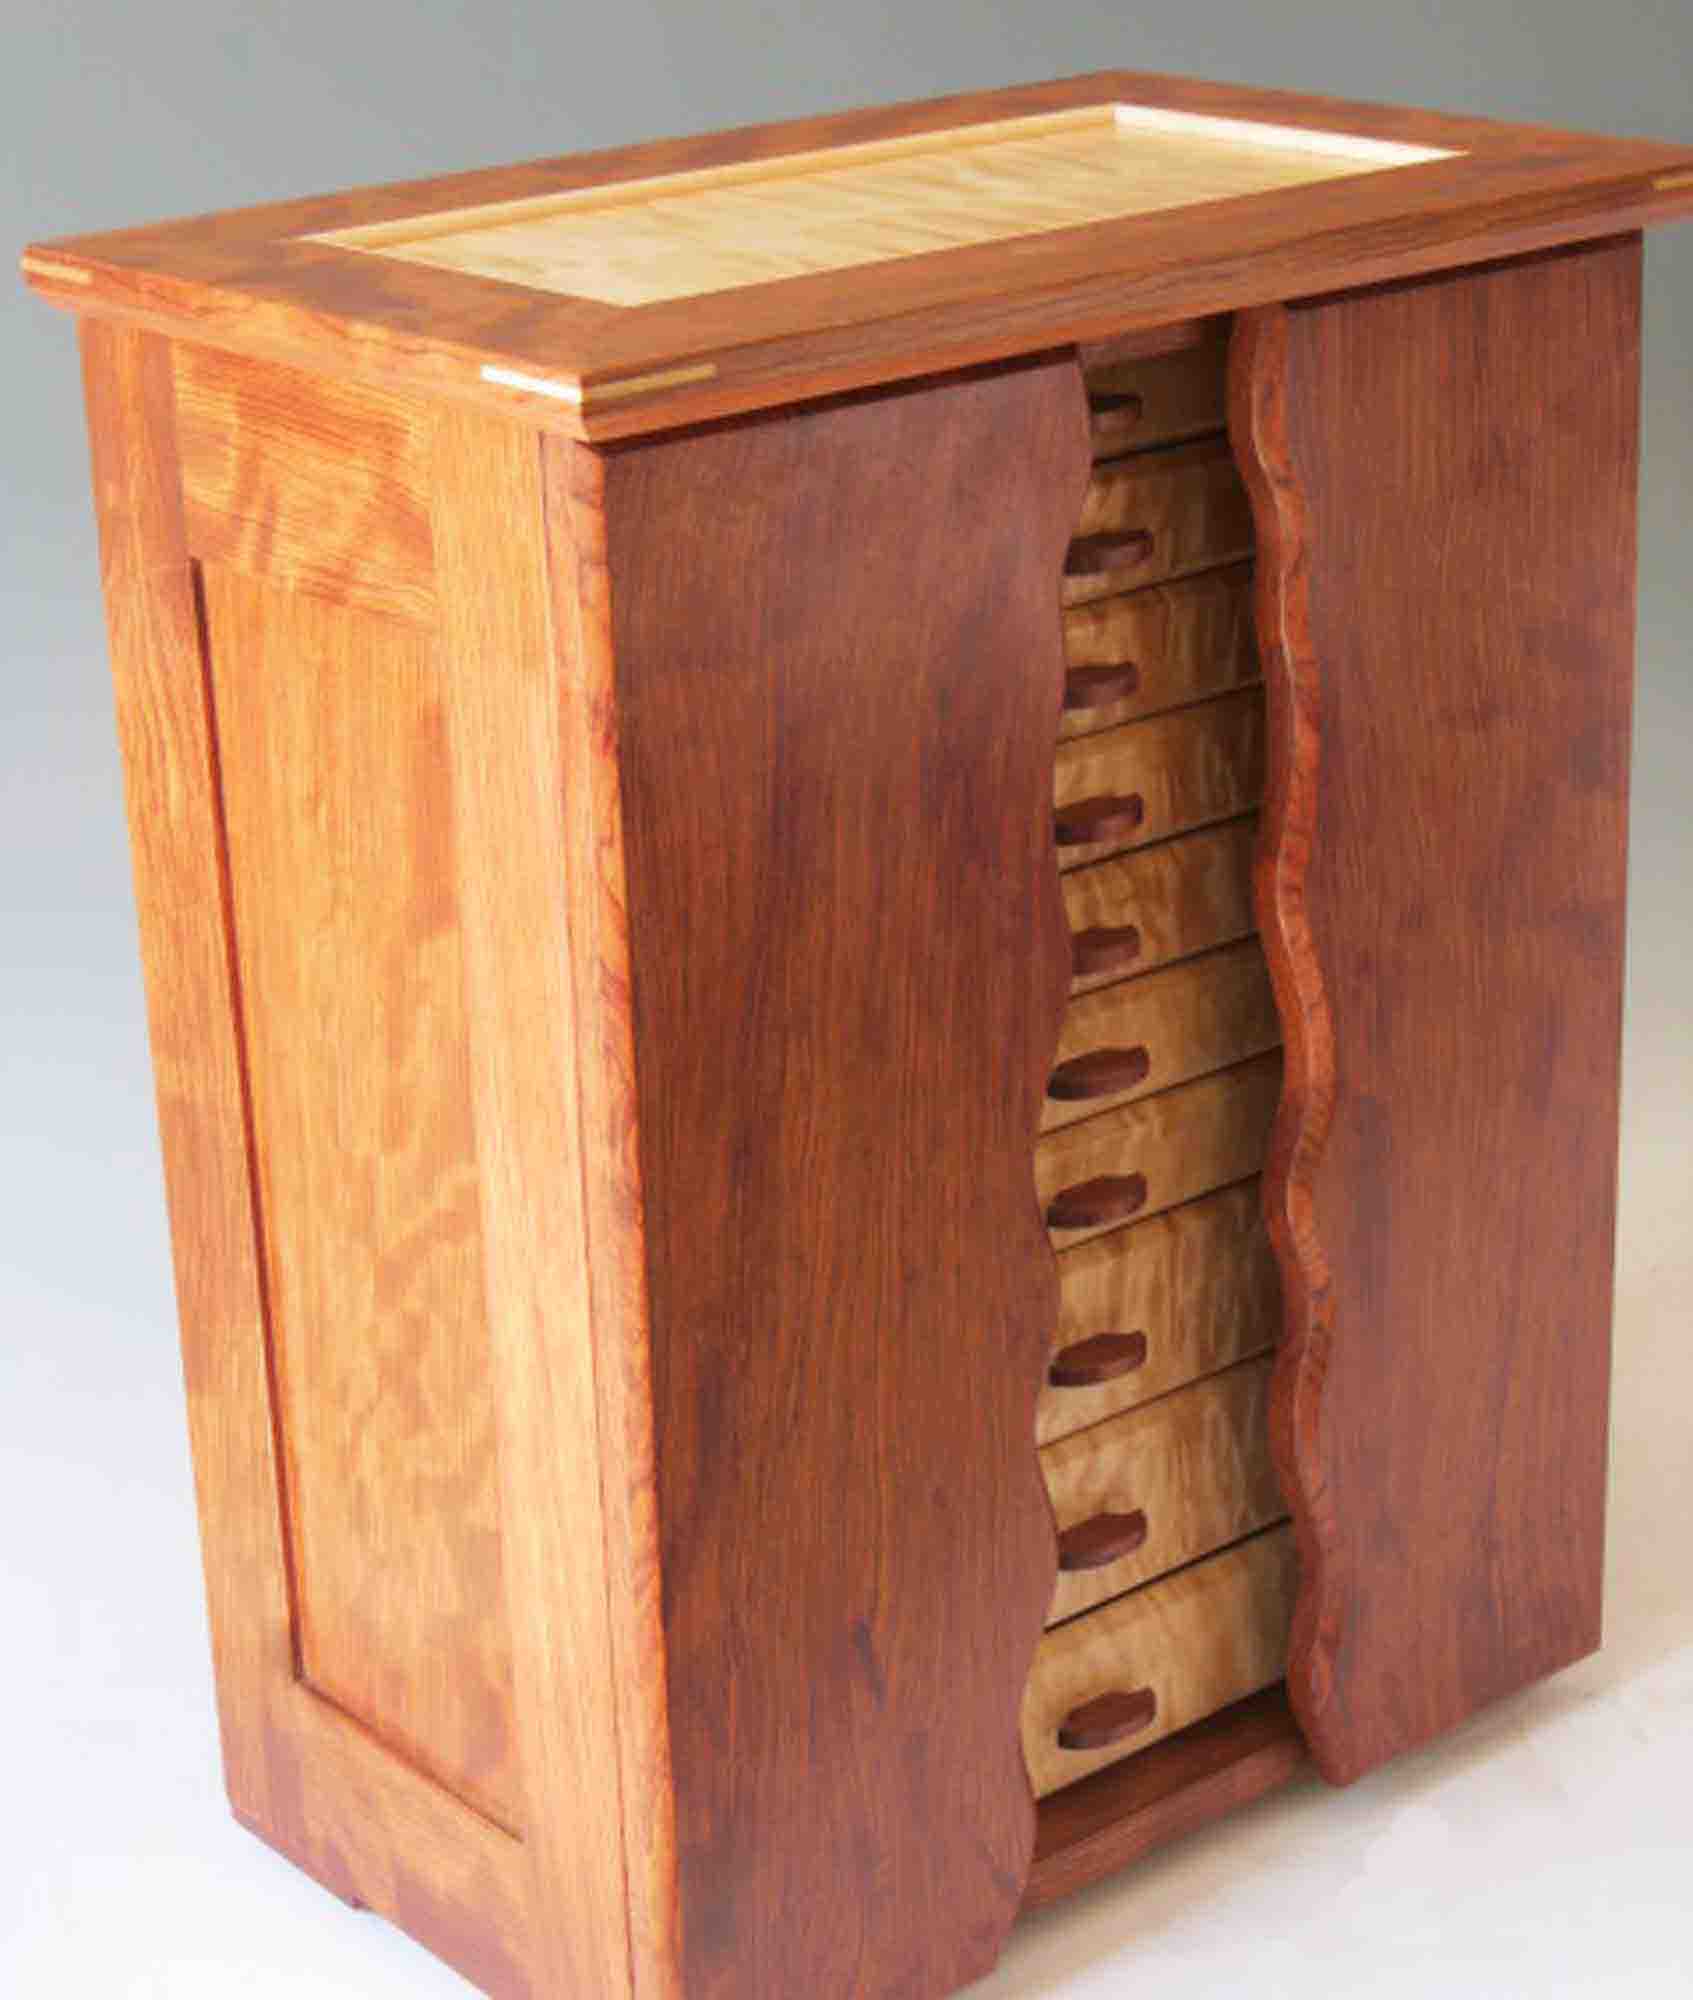 The Beauty Of Handcrafted Wooden Furniture